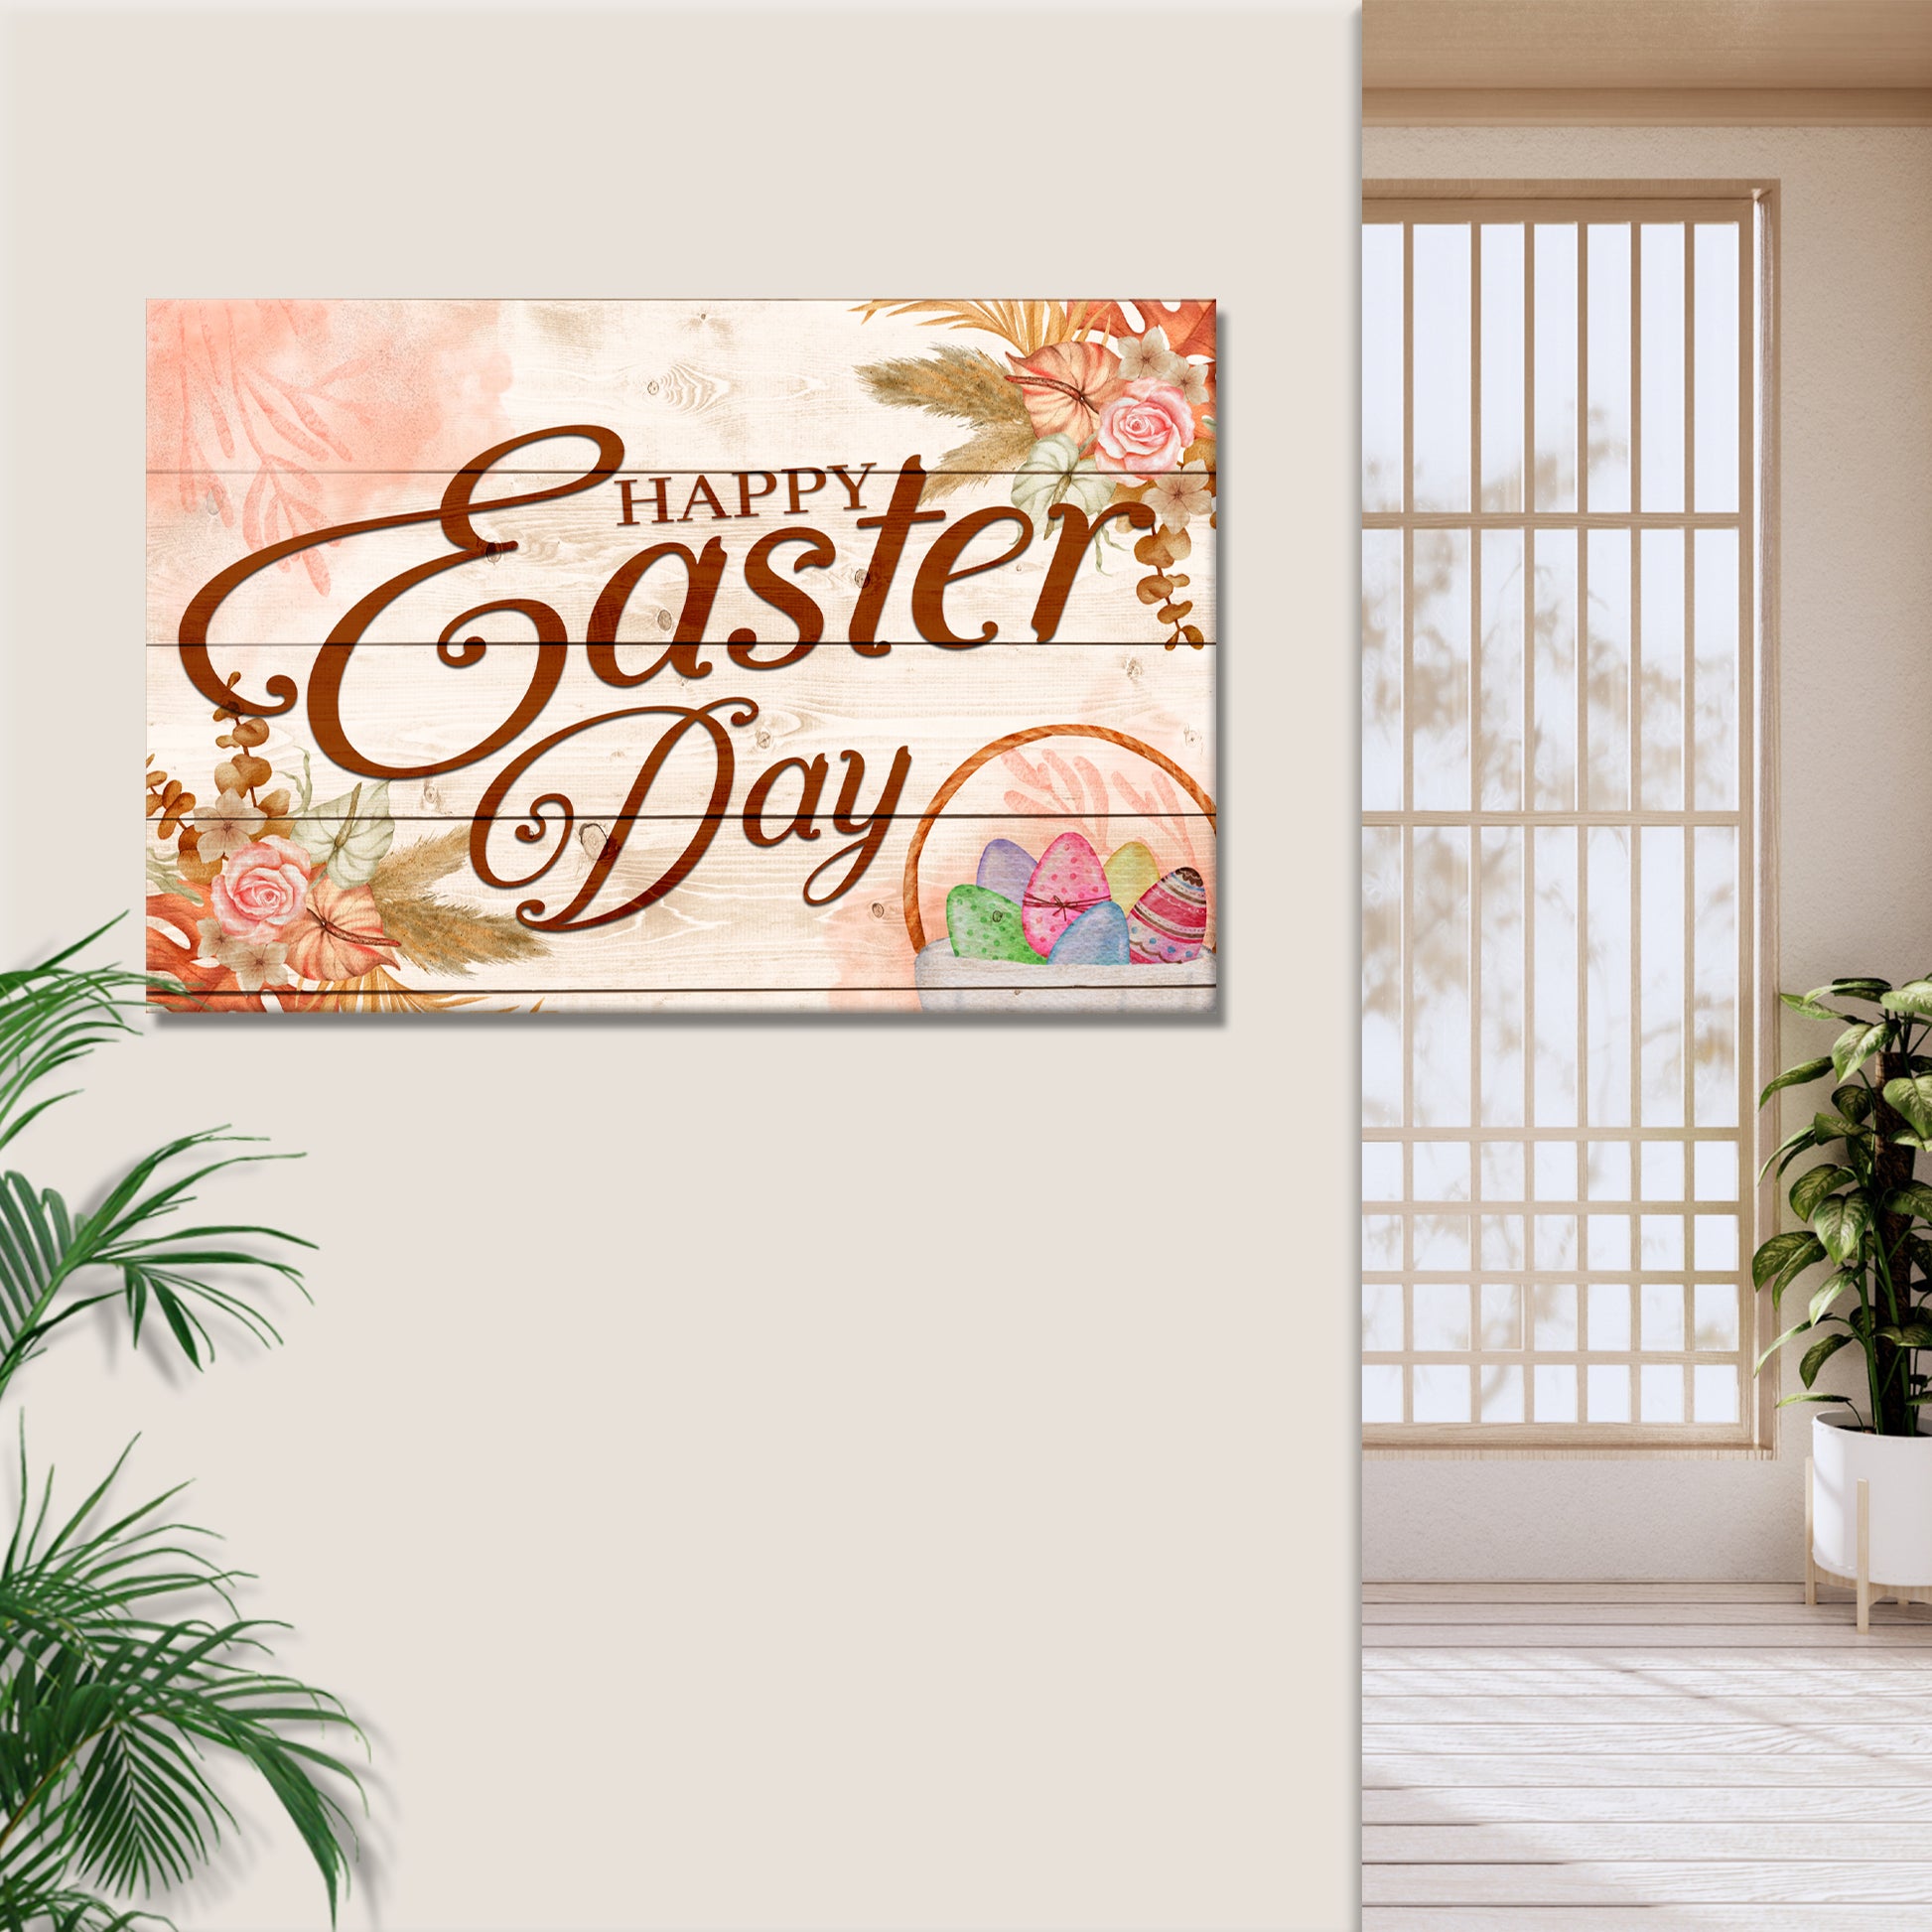 Happy Easter Greetings Sign Style 1 - Image by Tailored Canvases